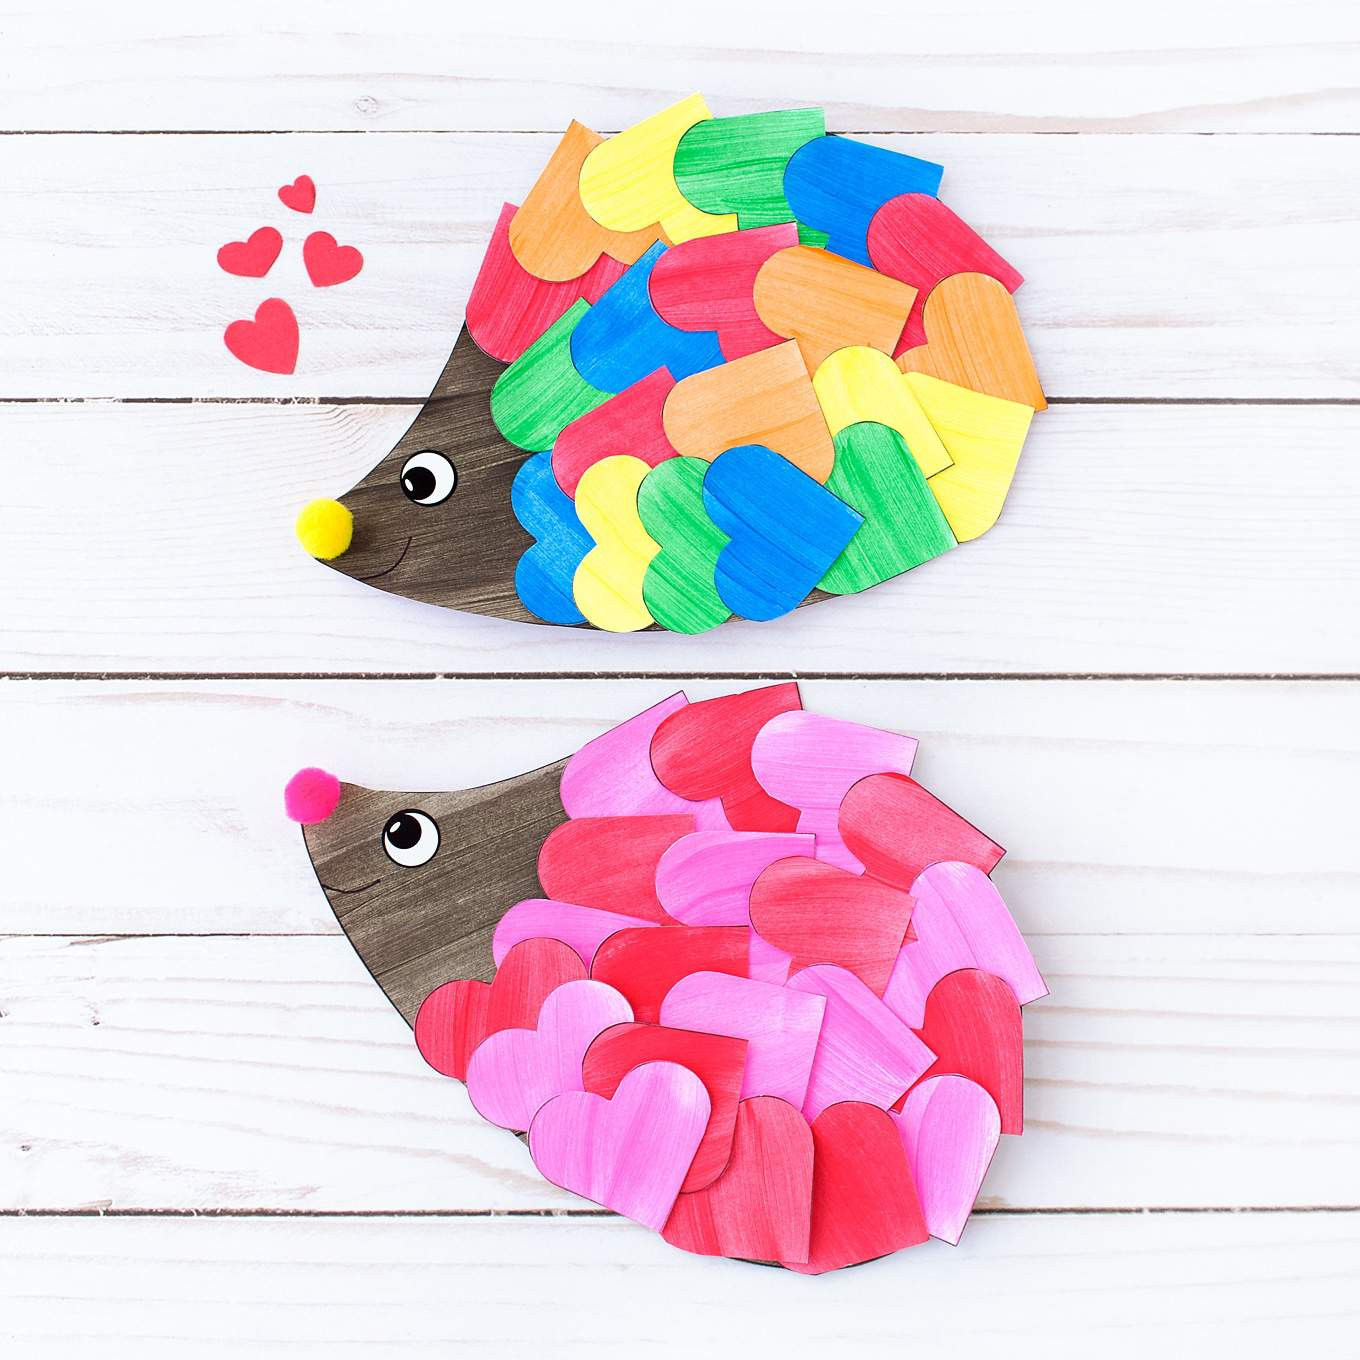 Cute Valentines Day Crafts
 6 Diy Cute Valentine s Kids Cards diy Thought